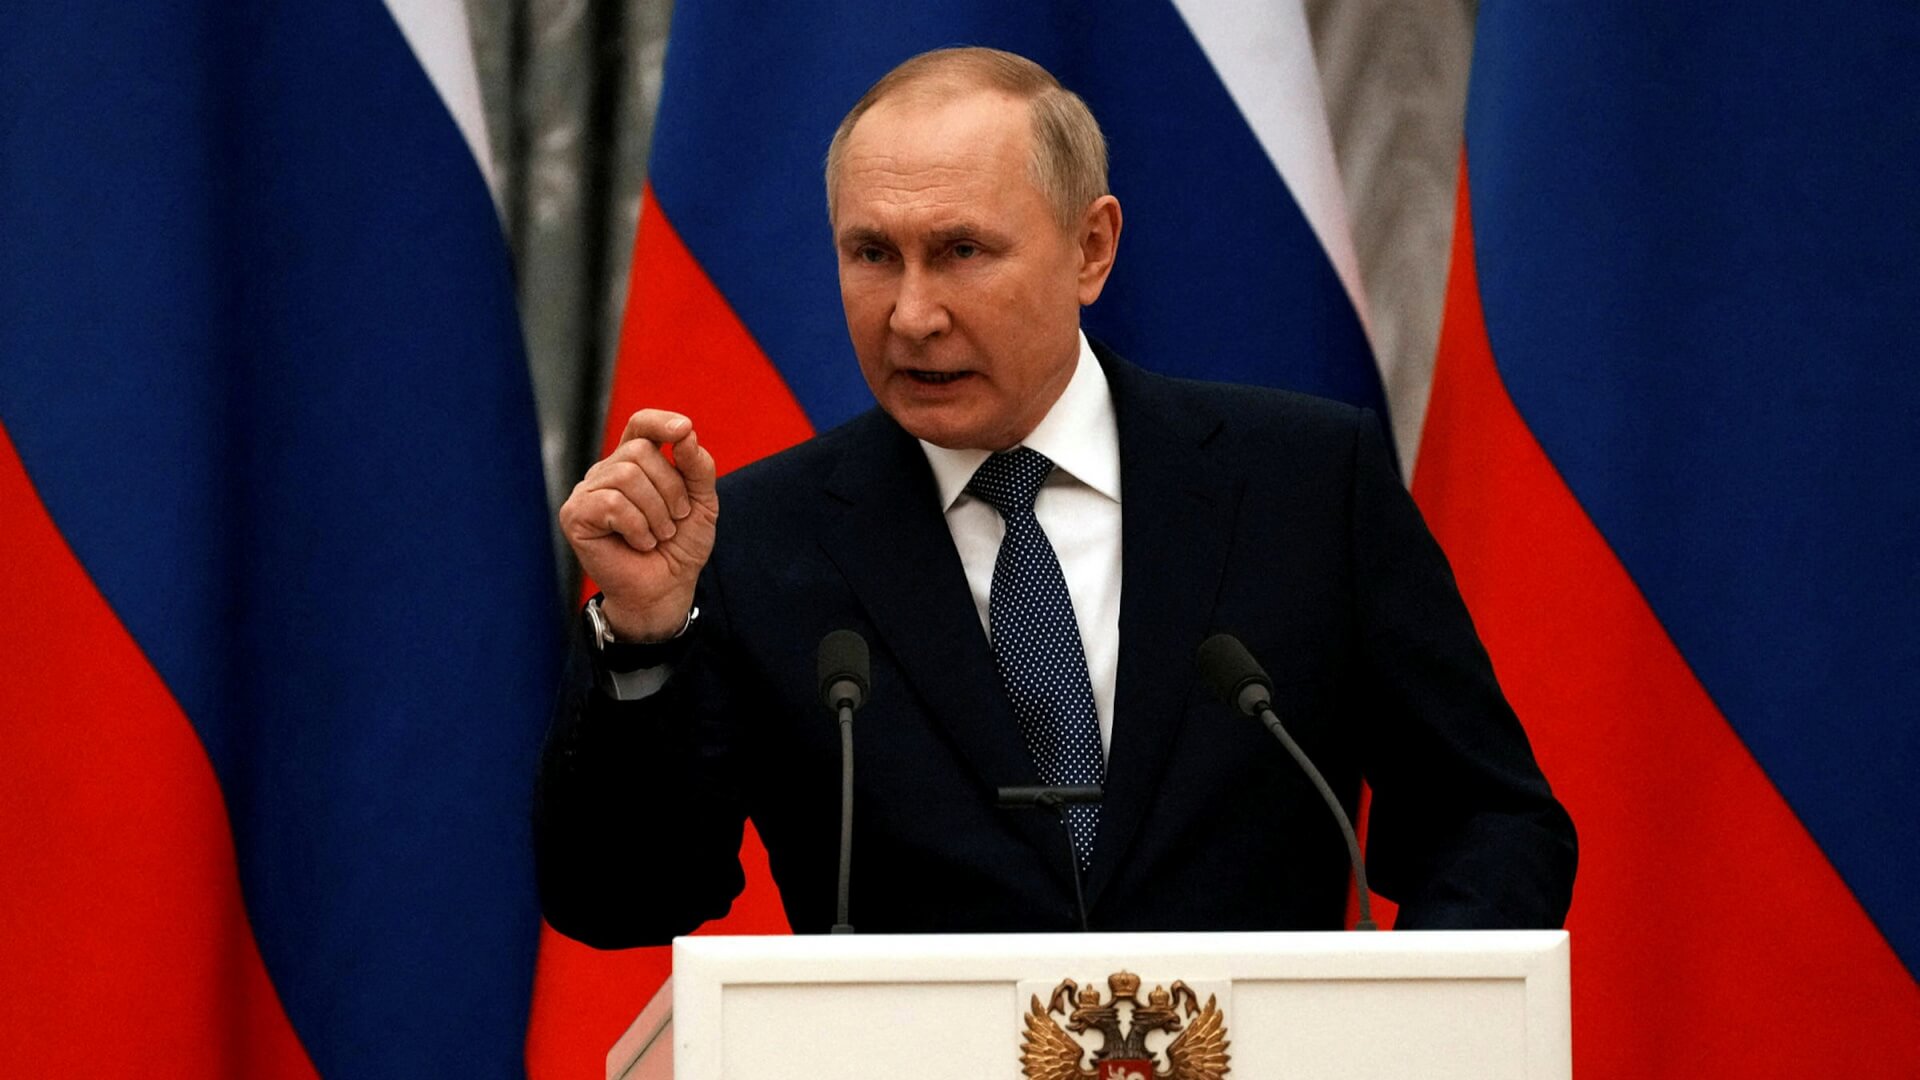 Putin Bans Export of 200 Essential Goods in Response to Western Sanctions